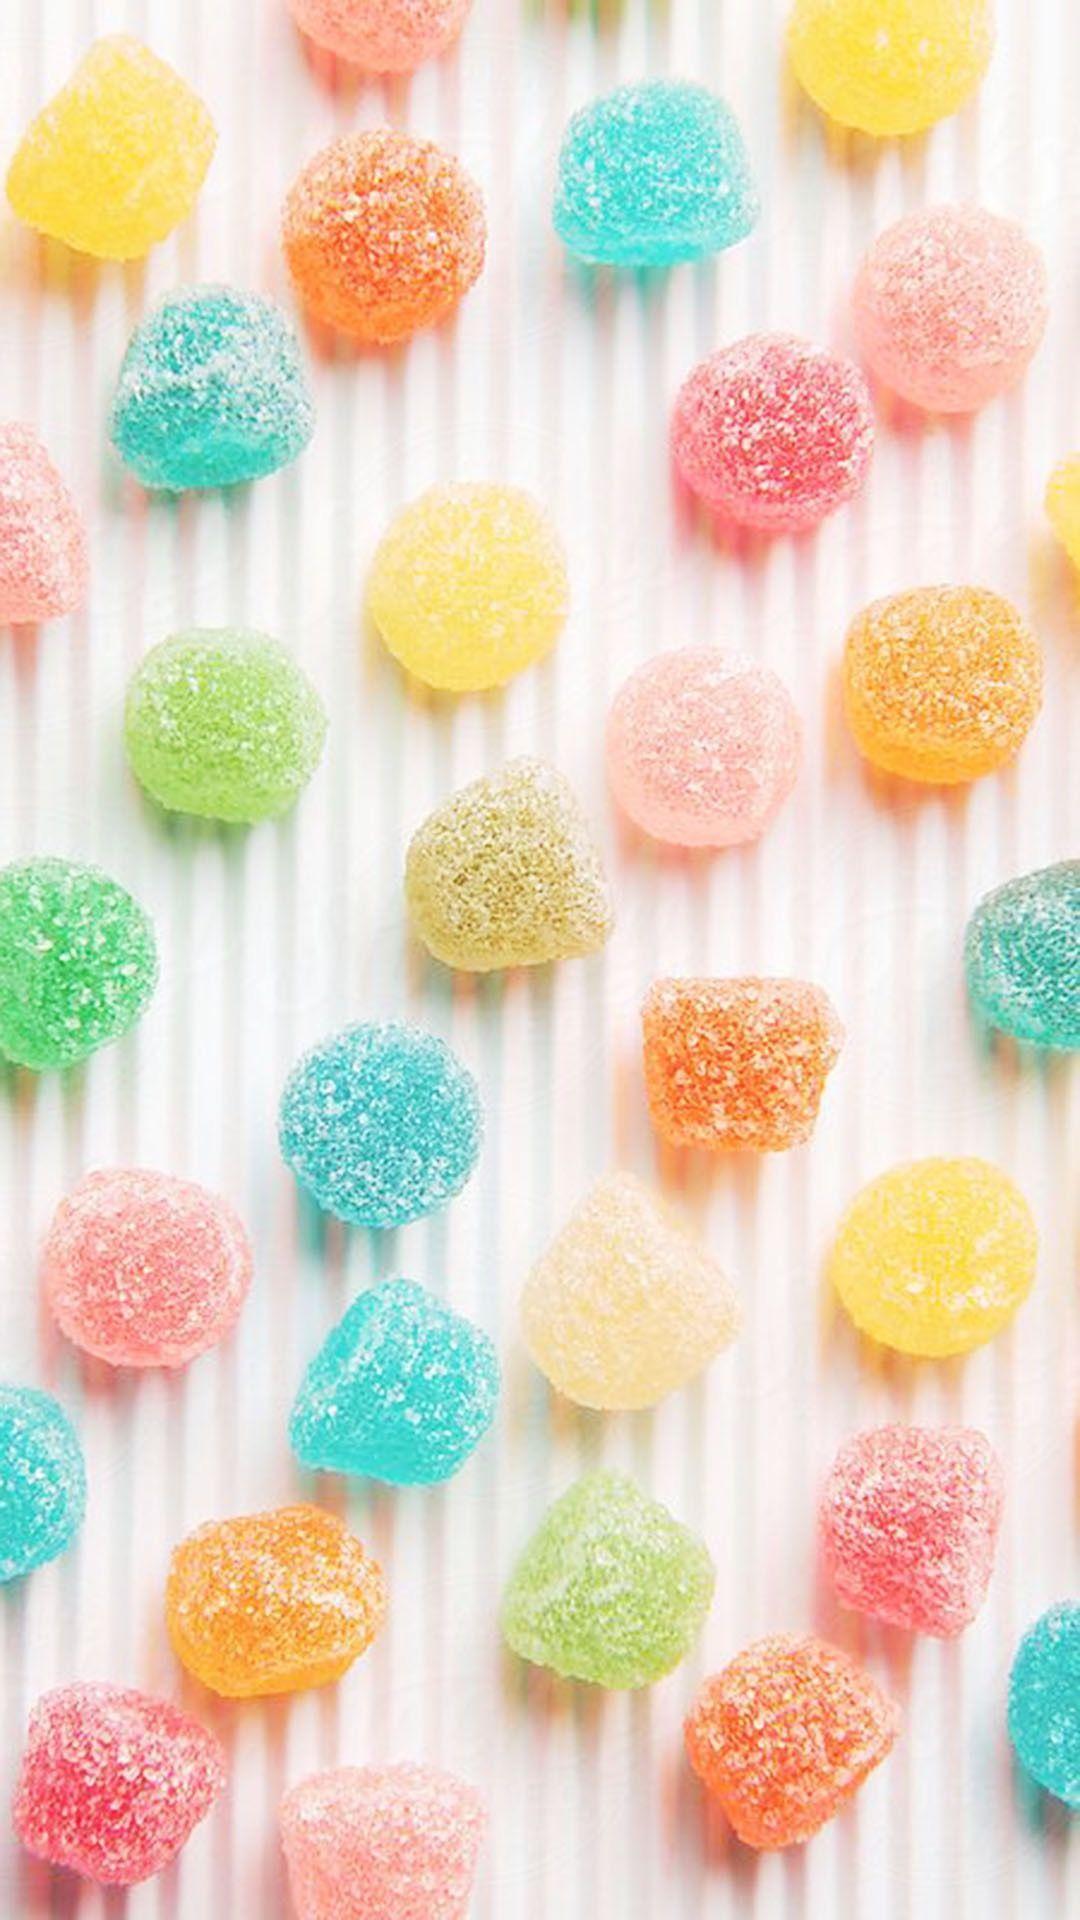 Lock Screen Wallpapers Candy - Wallpaper Cave